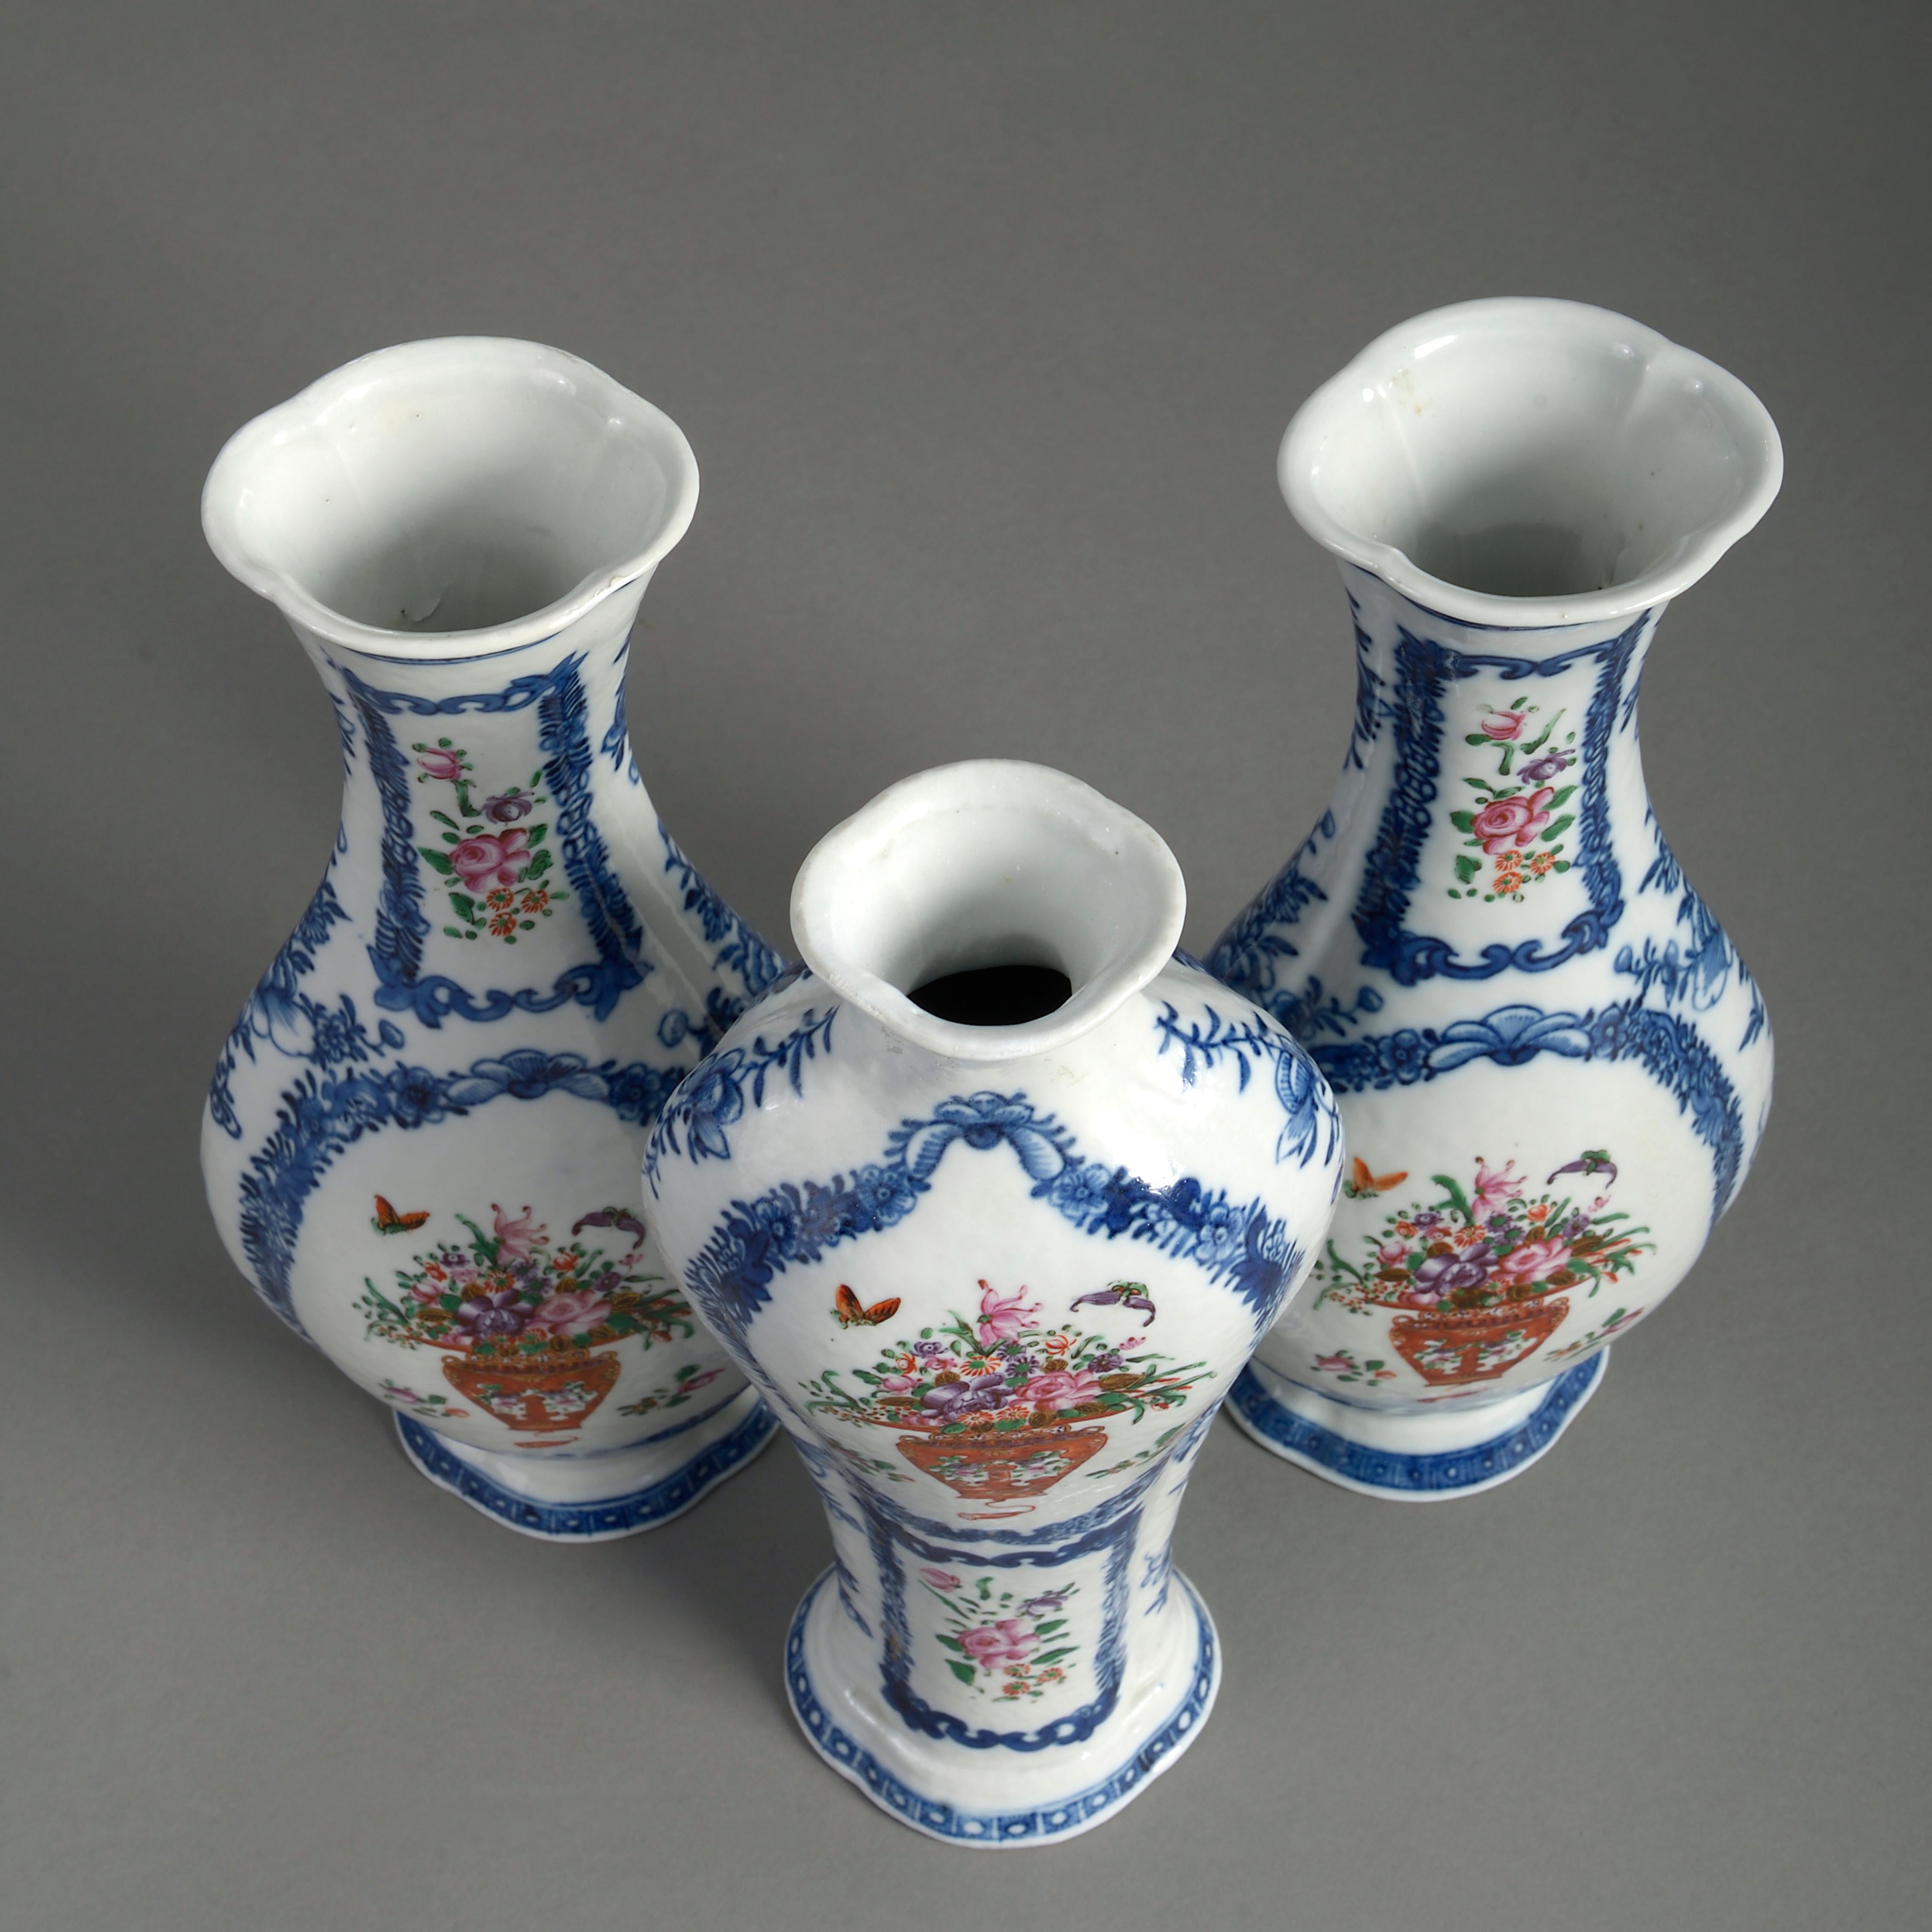 Fired 18th Century Garniture of Three Qianlong Period Famille Rose Porcelain Vases